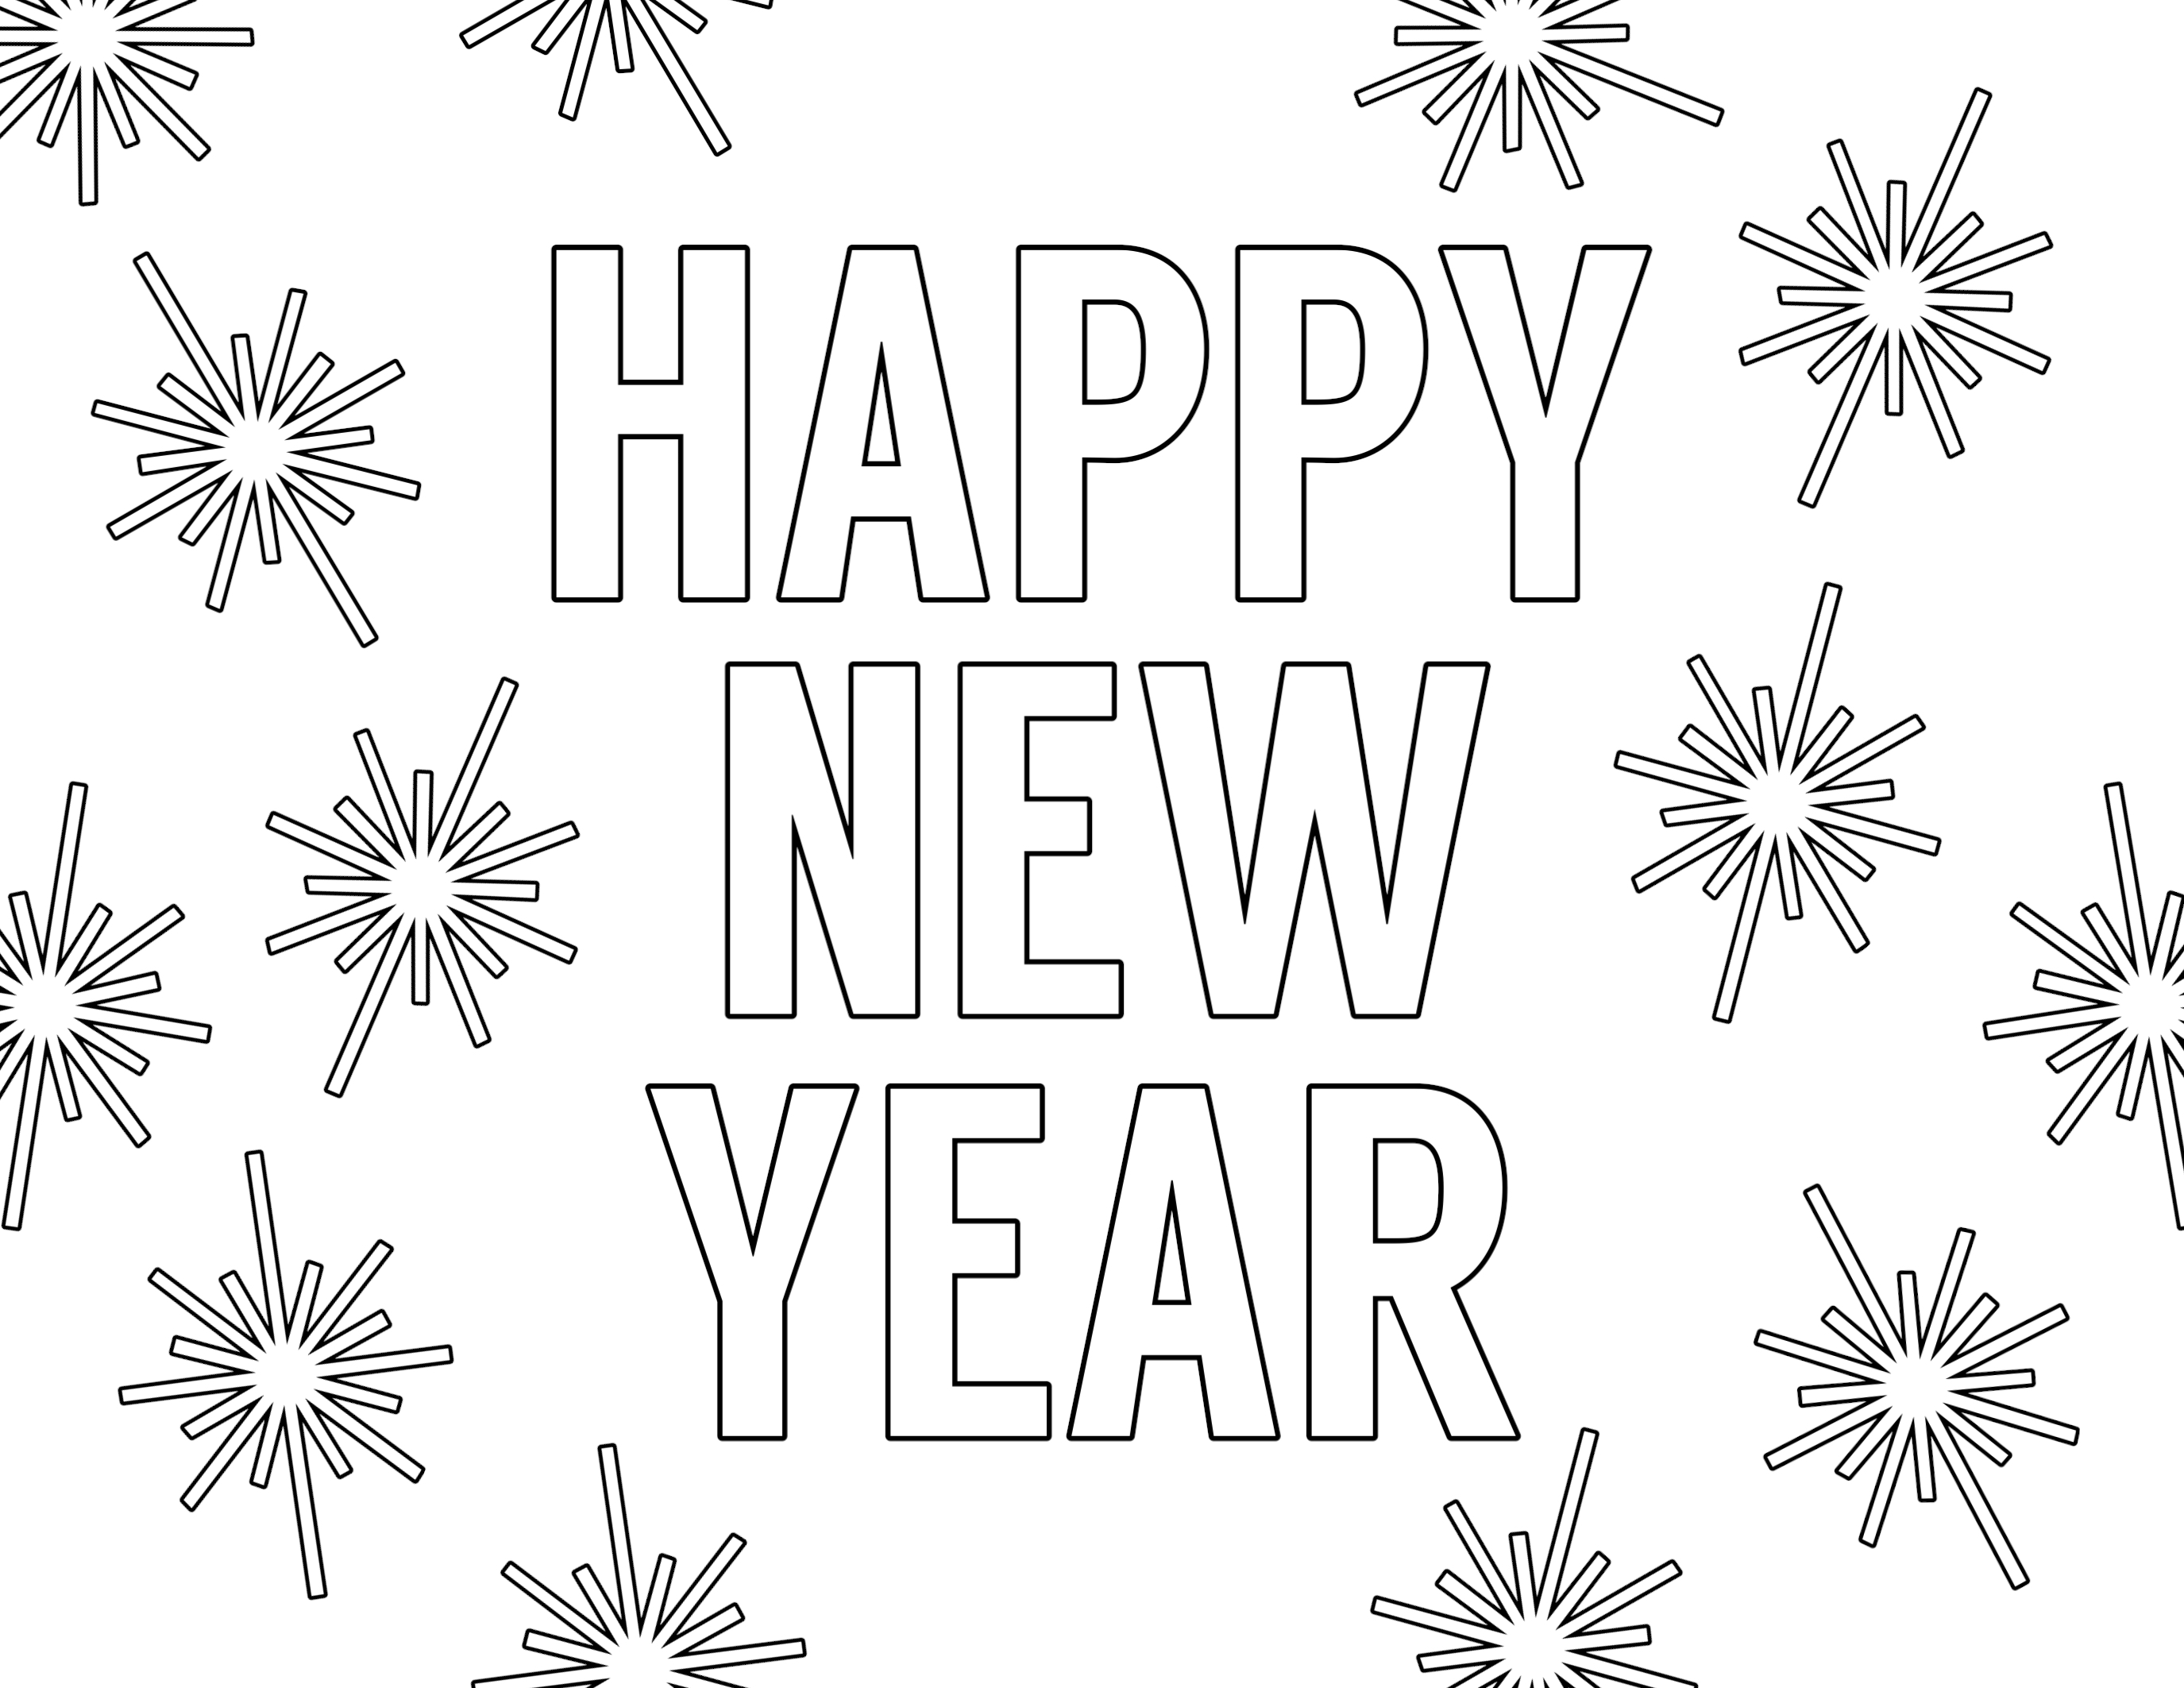 Happy New Year Coloring Pages Free Printable   Paper Trail ...